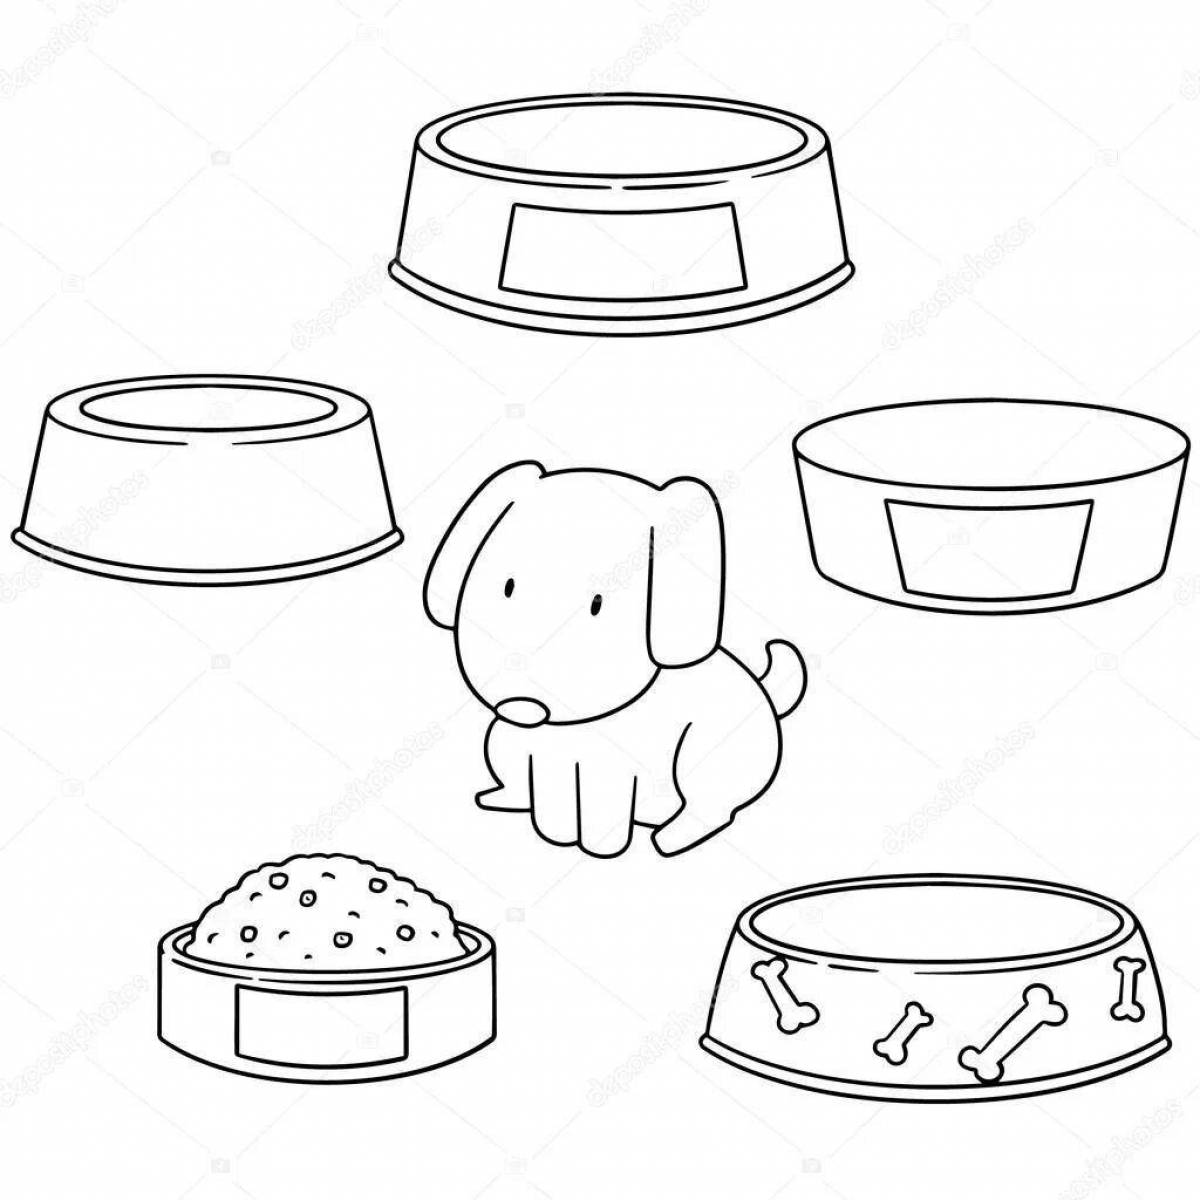 Bright dog food coloring page